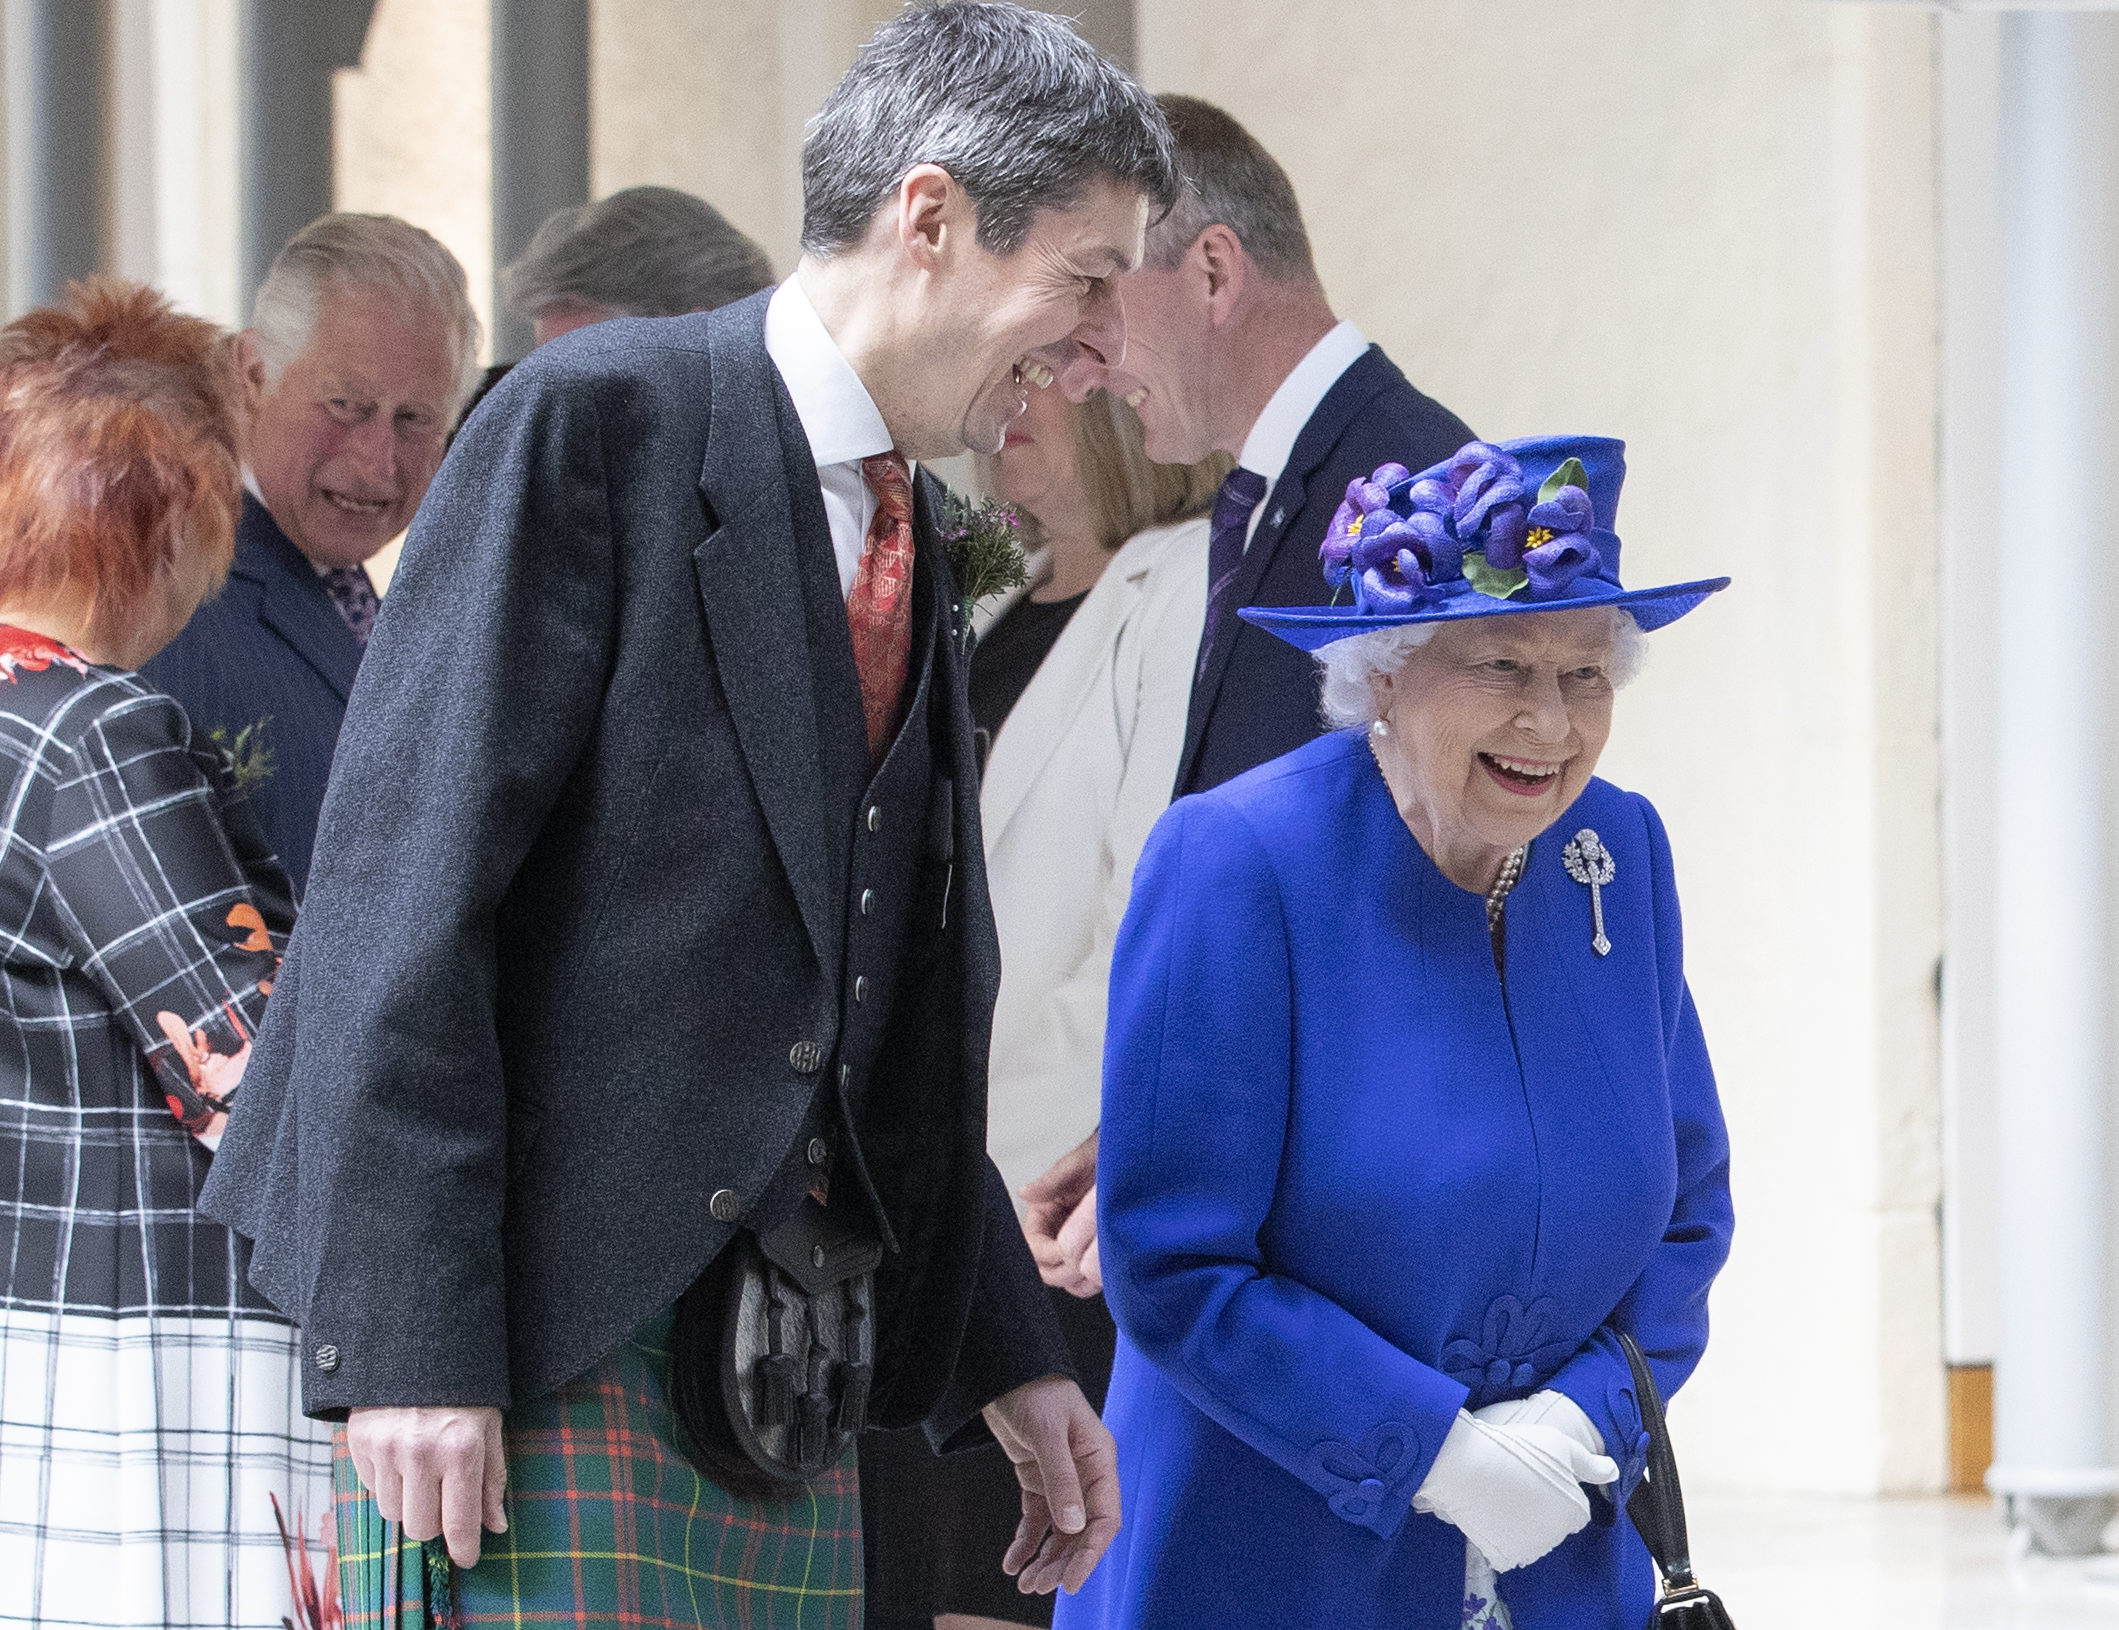 Queen Elizabeth II accompanied by Presiding Officer of the Scottish Parliament Ken Macintosh as they walk through the Garden Lobby at the Scottish Parliament in Edinburgh ahead of a ceremony marking the 20th anniversary of devolution in the Holyrood chamber. on June 29, 2019 in Edinburgh, Scotland.